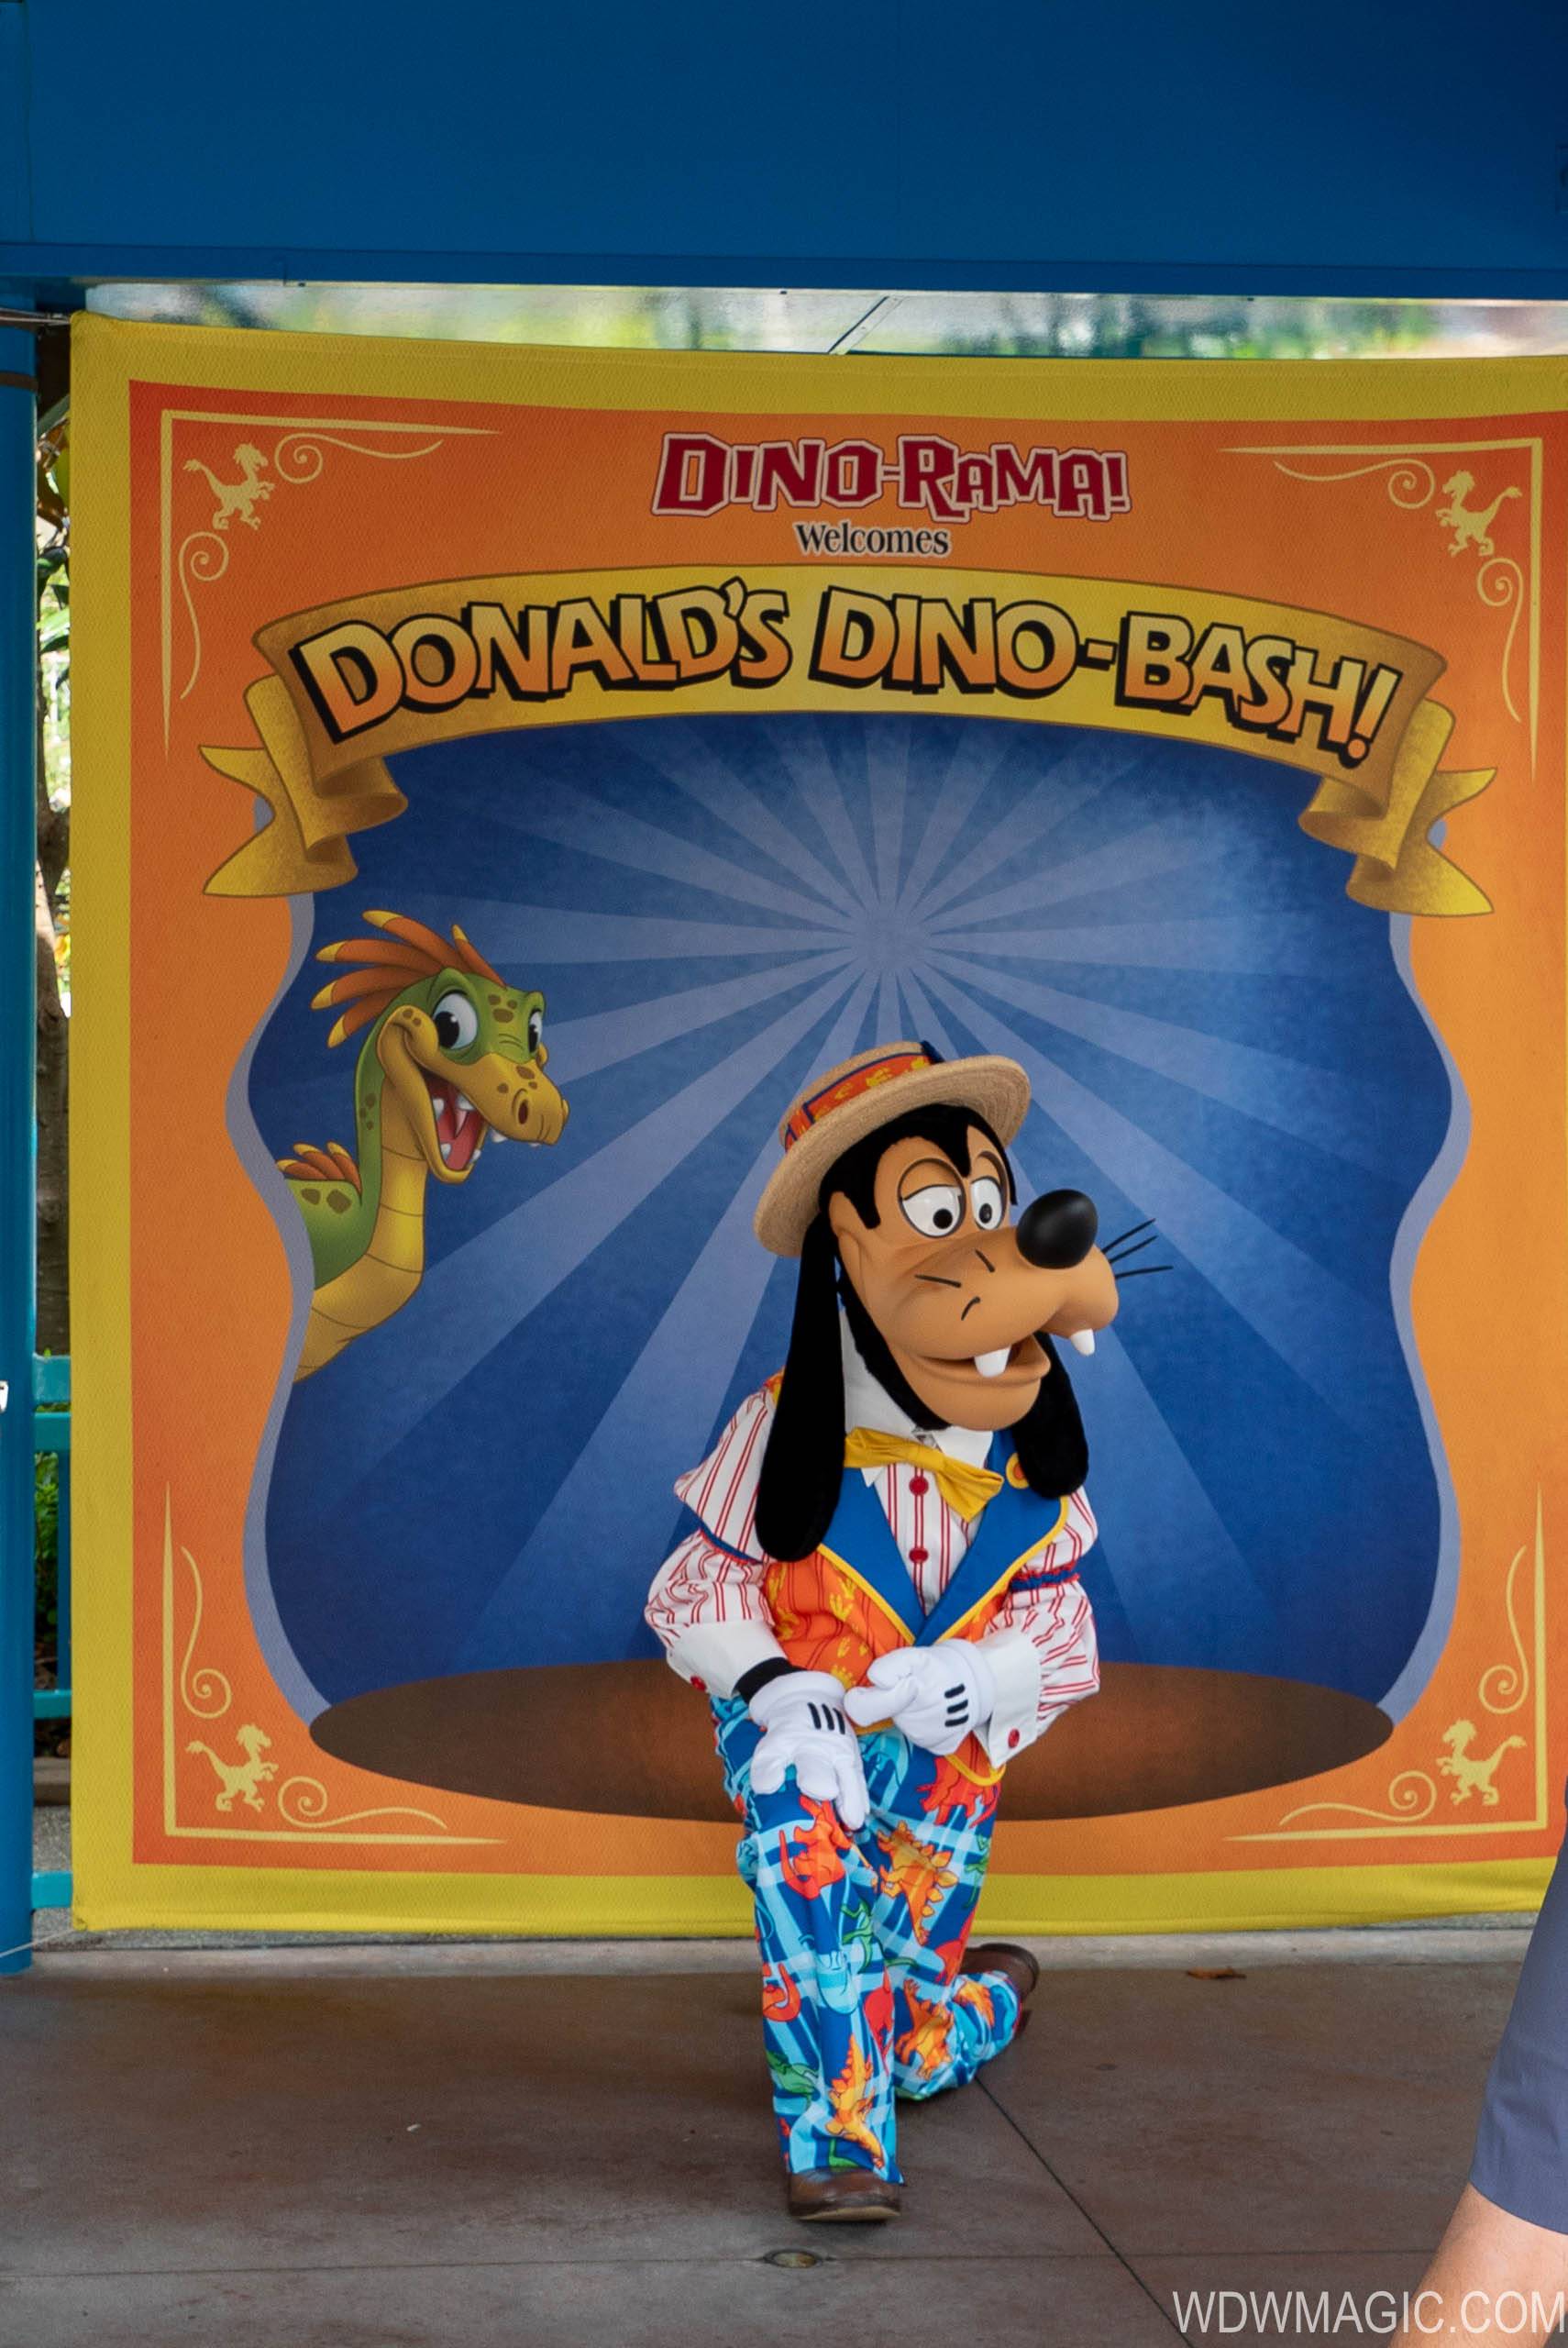 Donald's Dino-Bash overview